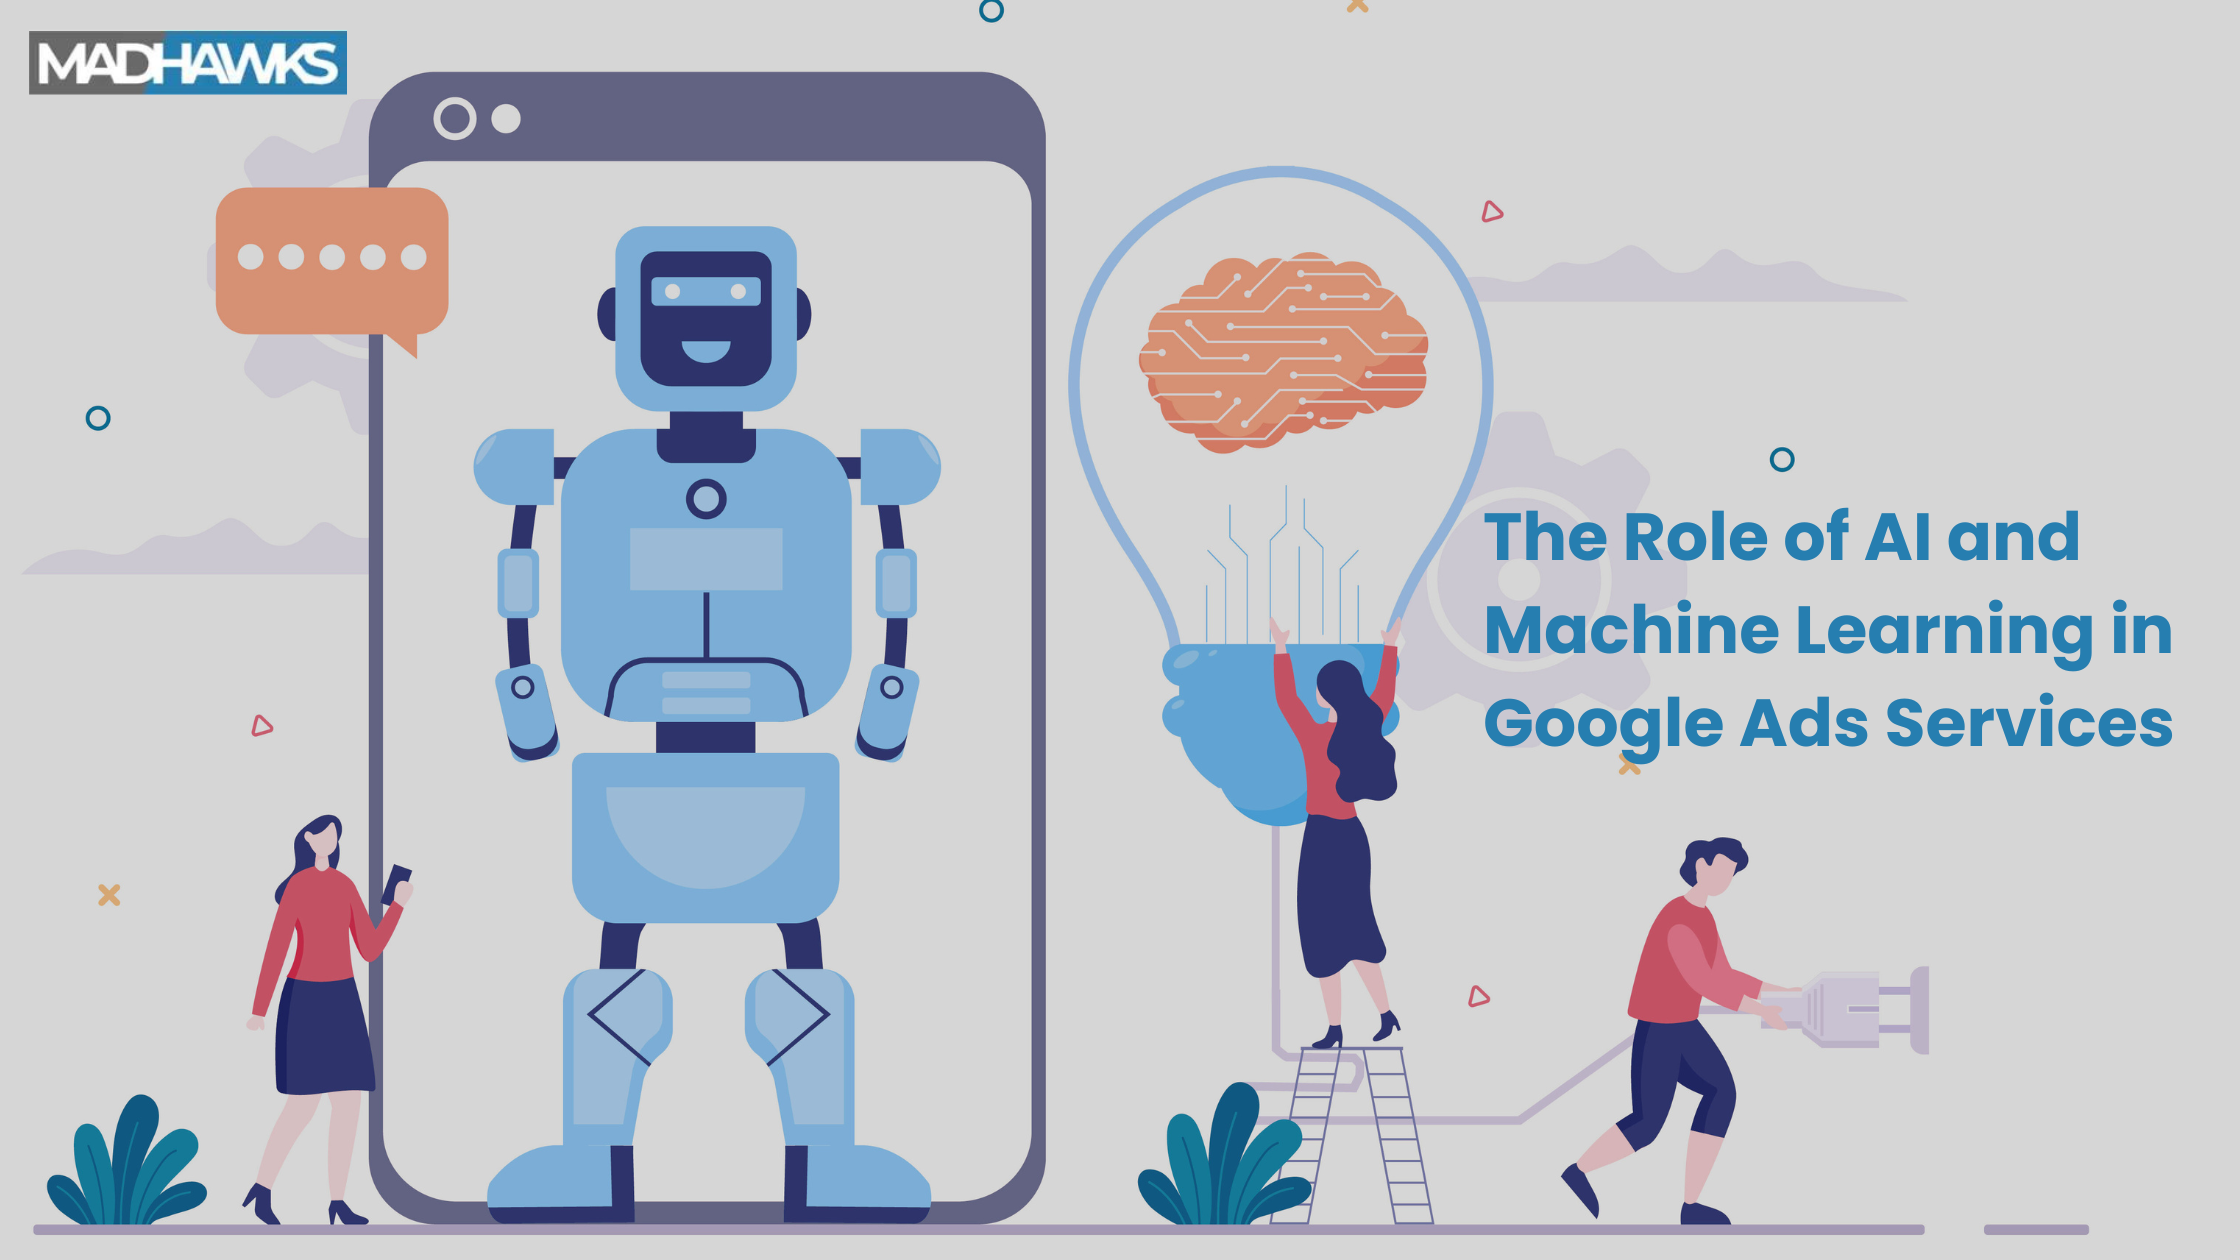 The Role of AI and Machine Learning in Google Ads Services